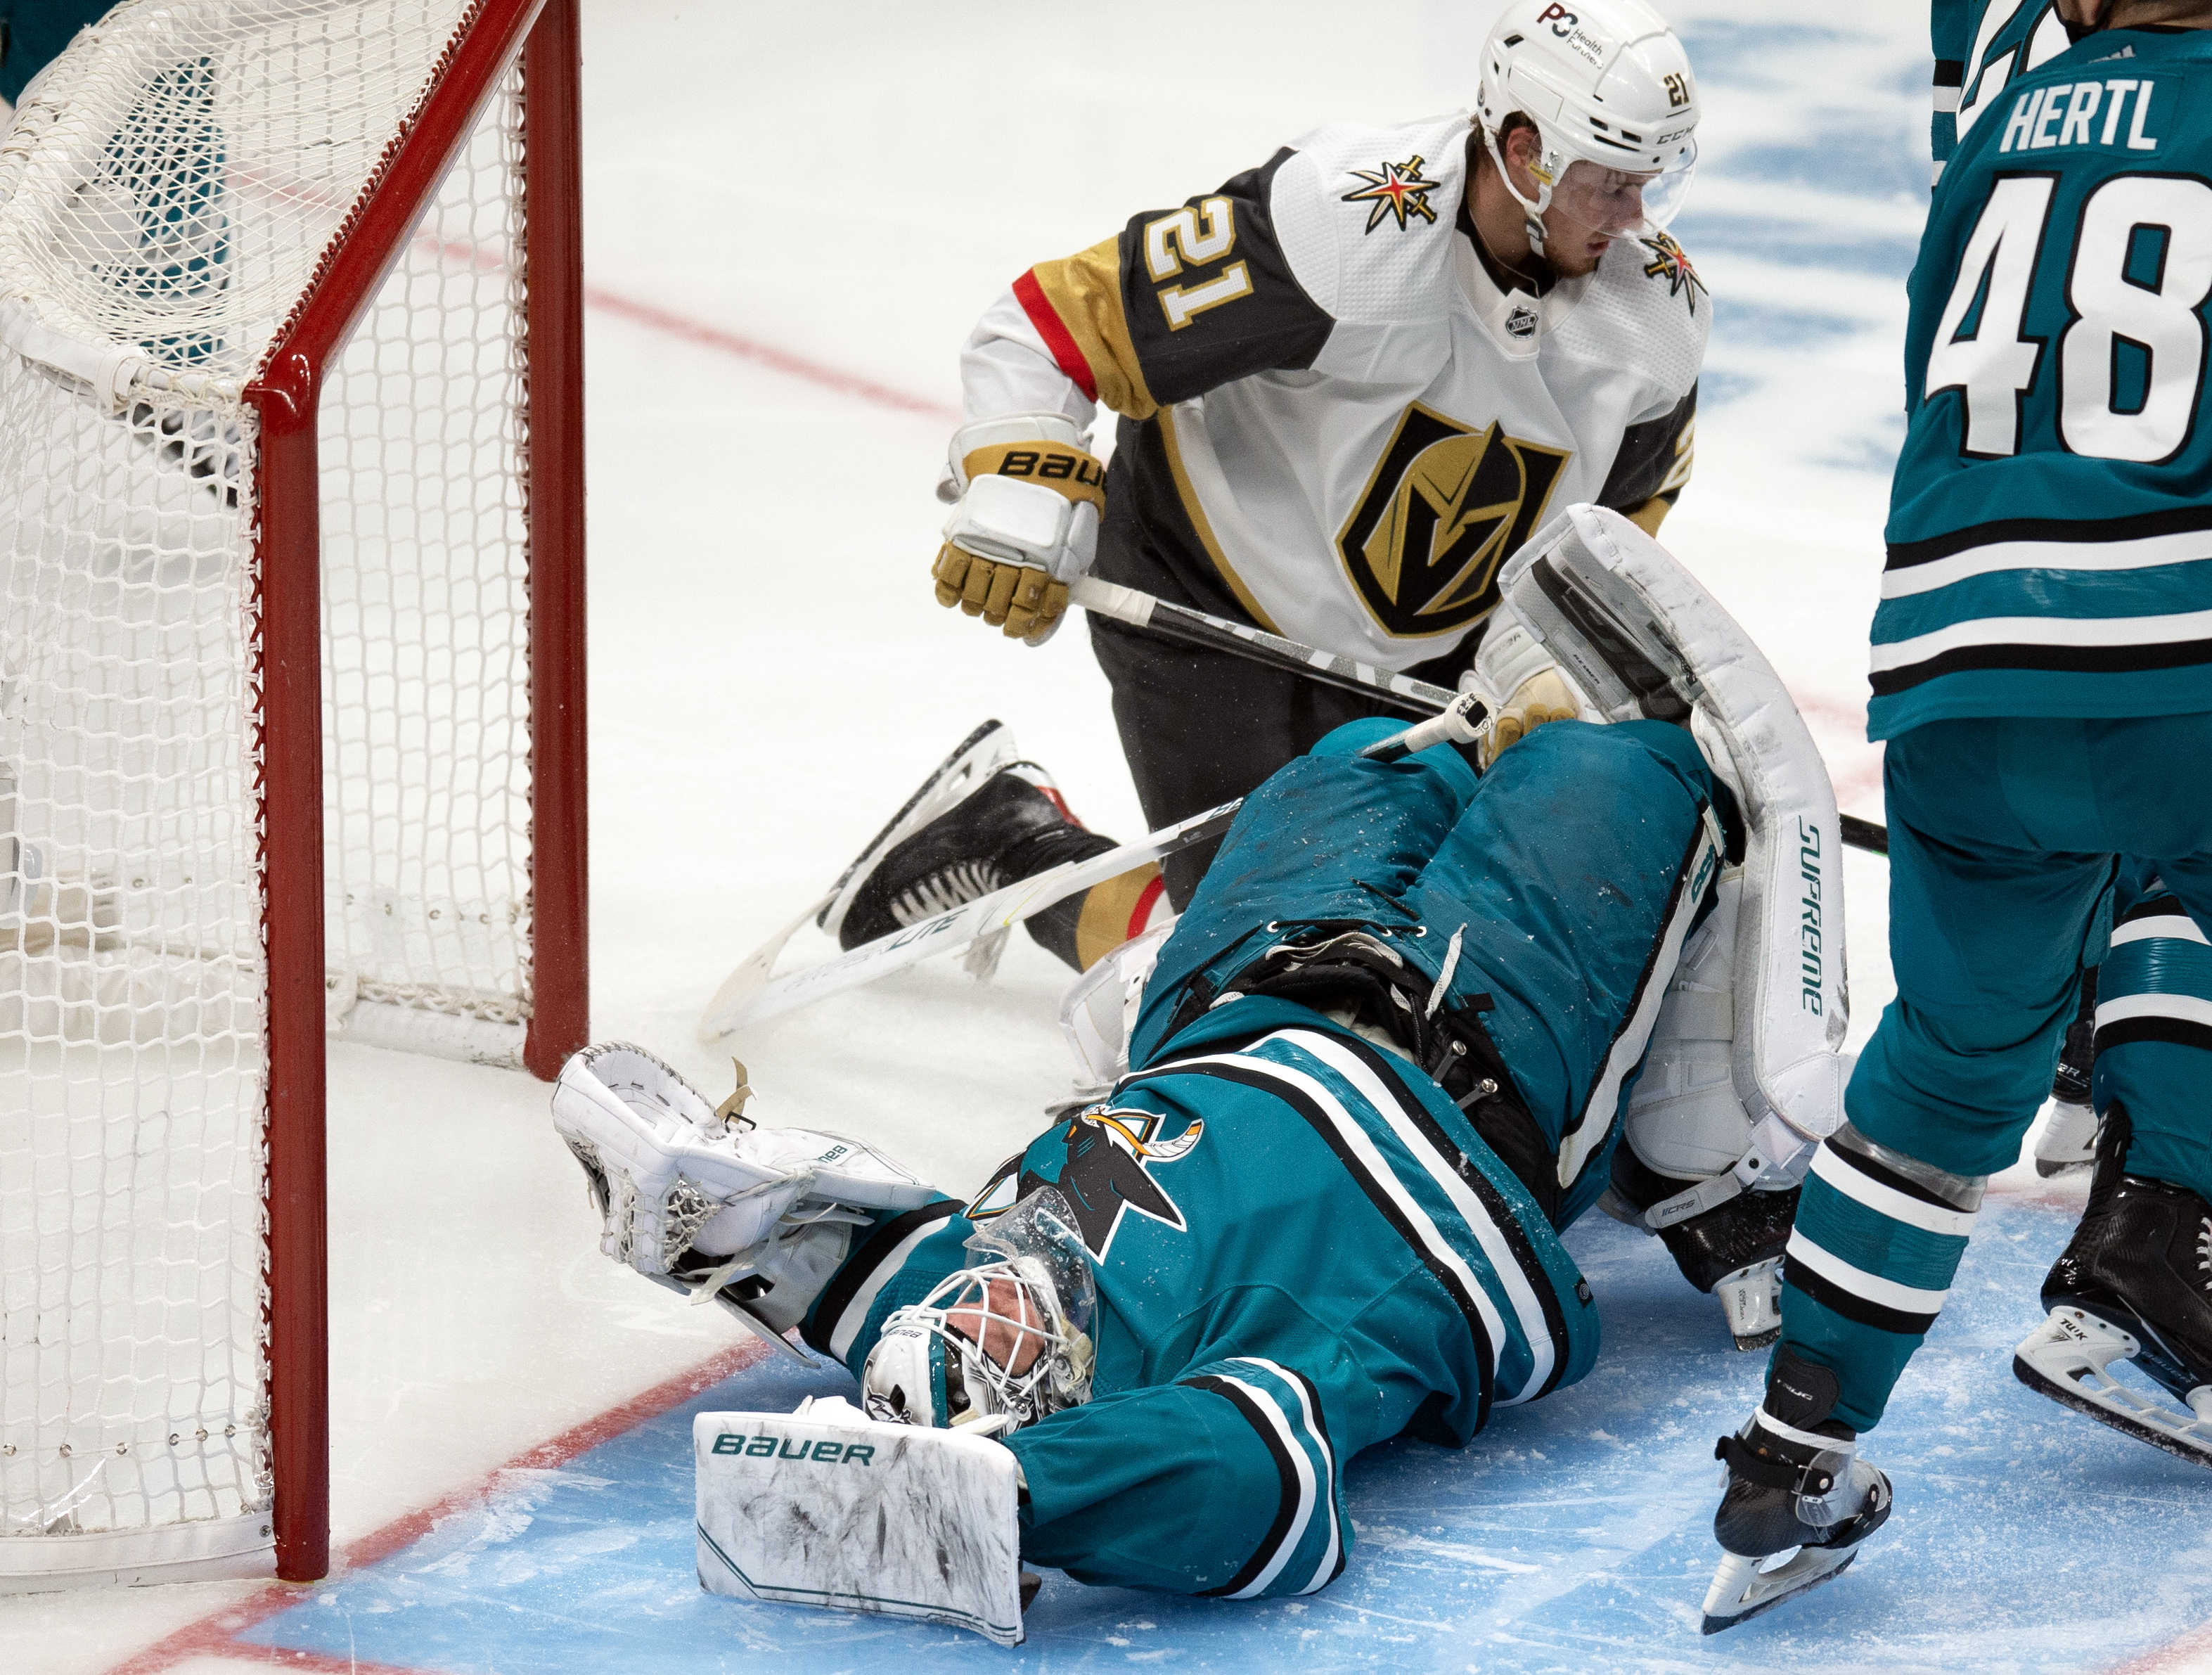 San Jose Sharks goaltender James Reimer (47) lays out on the ice after a collision with Las Vegas Golden Knights center Brett Howden (21) during the third period at SAP Center at San Jose. Howden was penalized for goalie interference.